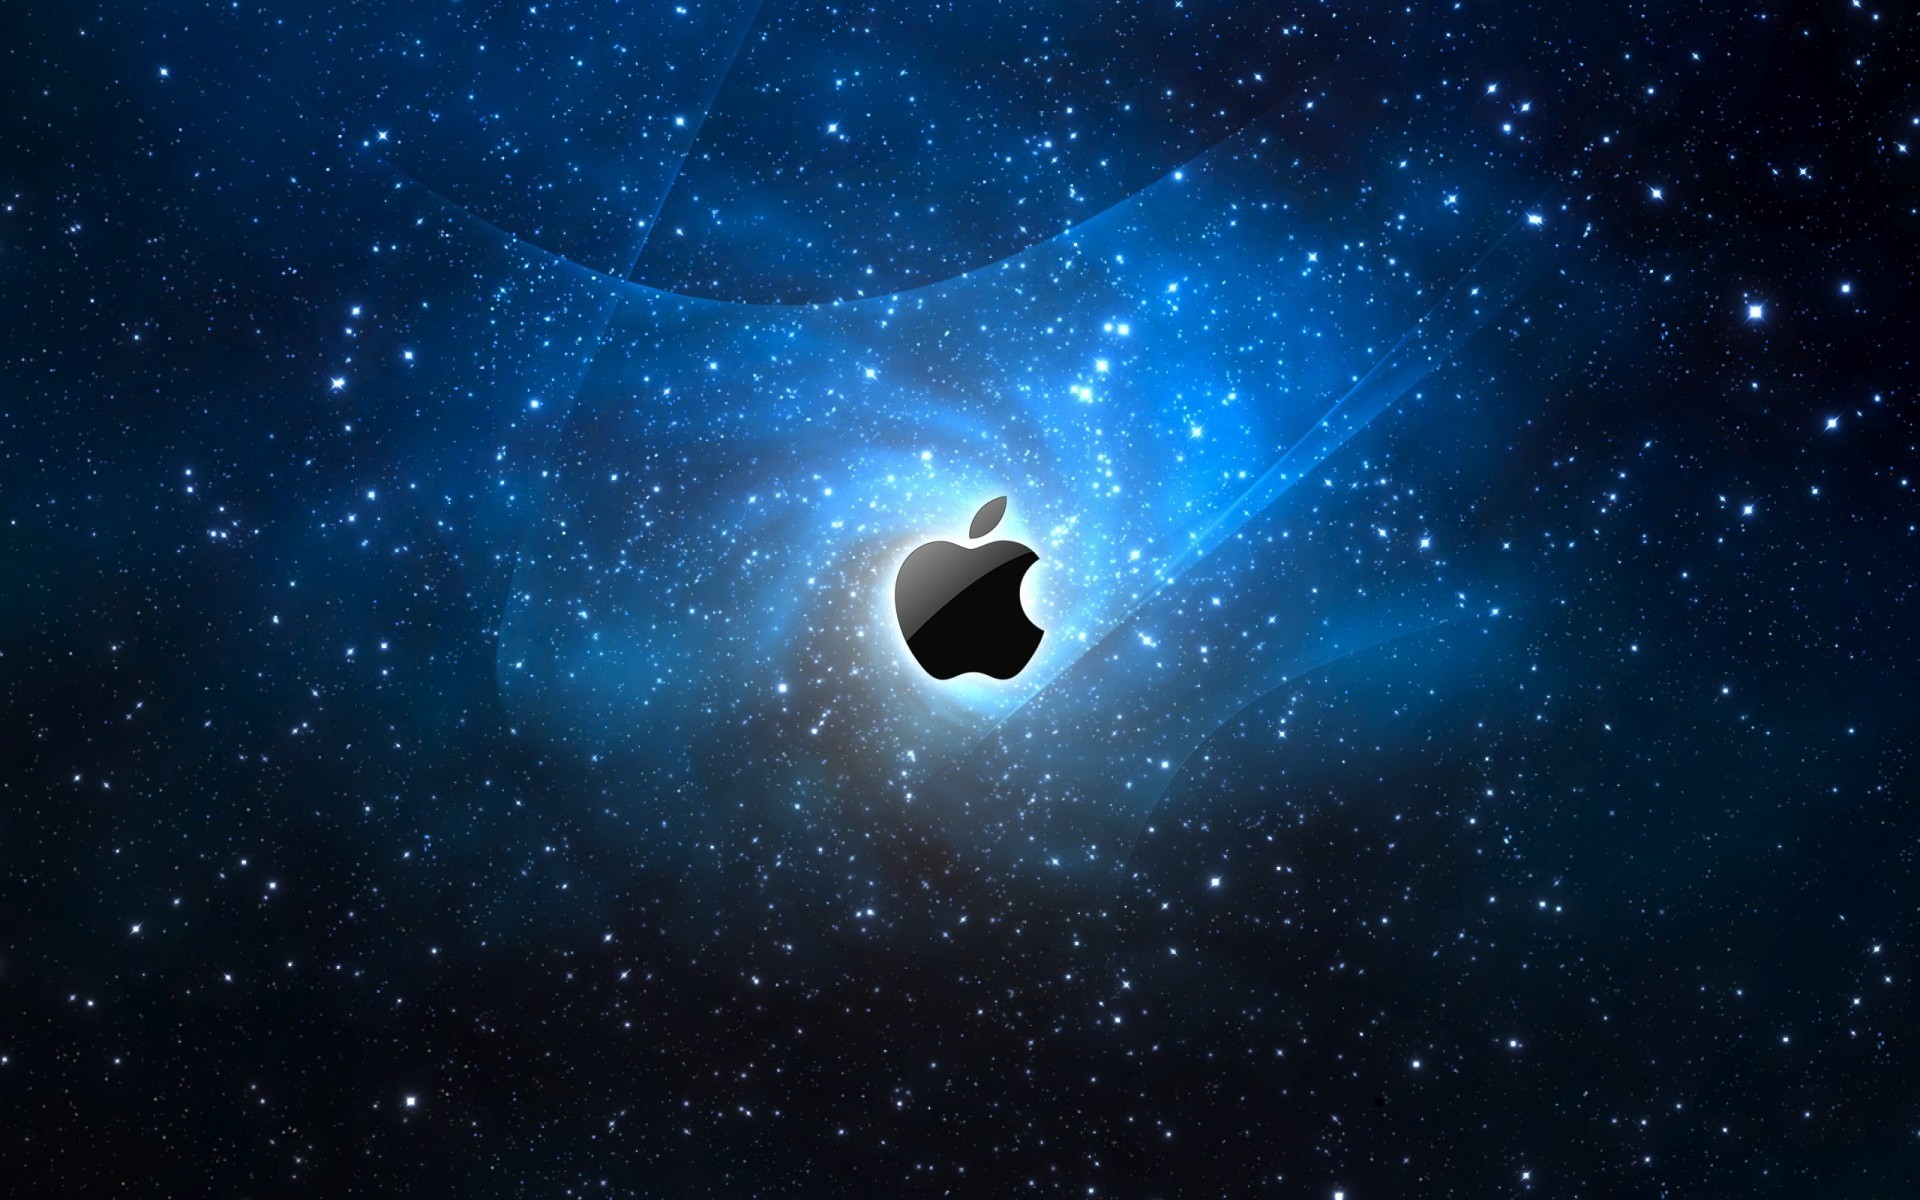 1920x1200 Cool Mac Galaxy Wallpaper Download free wallpapers and desktop backgrounds  in a variety of screen resolutions